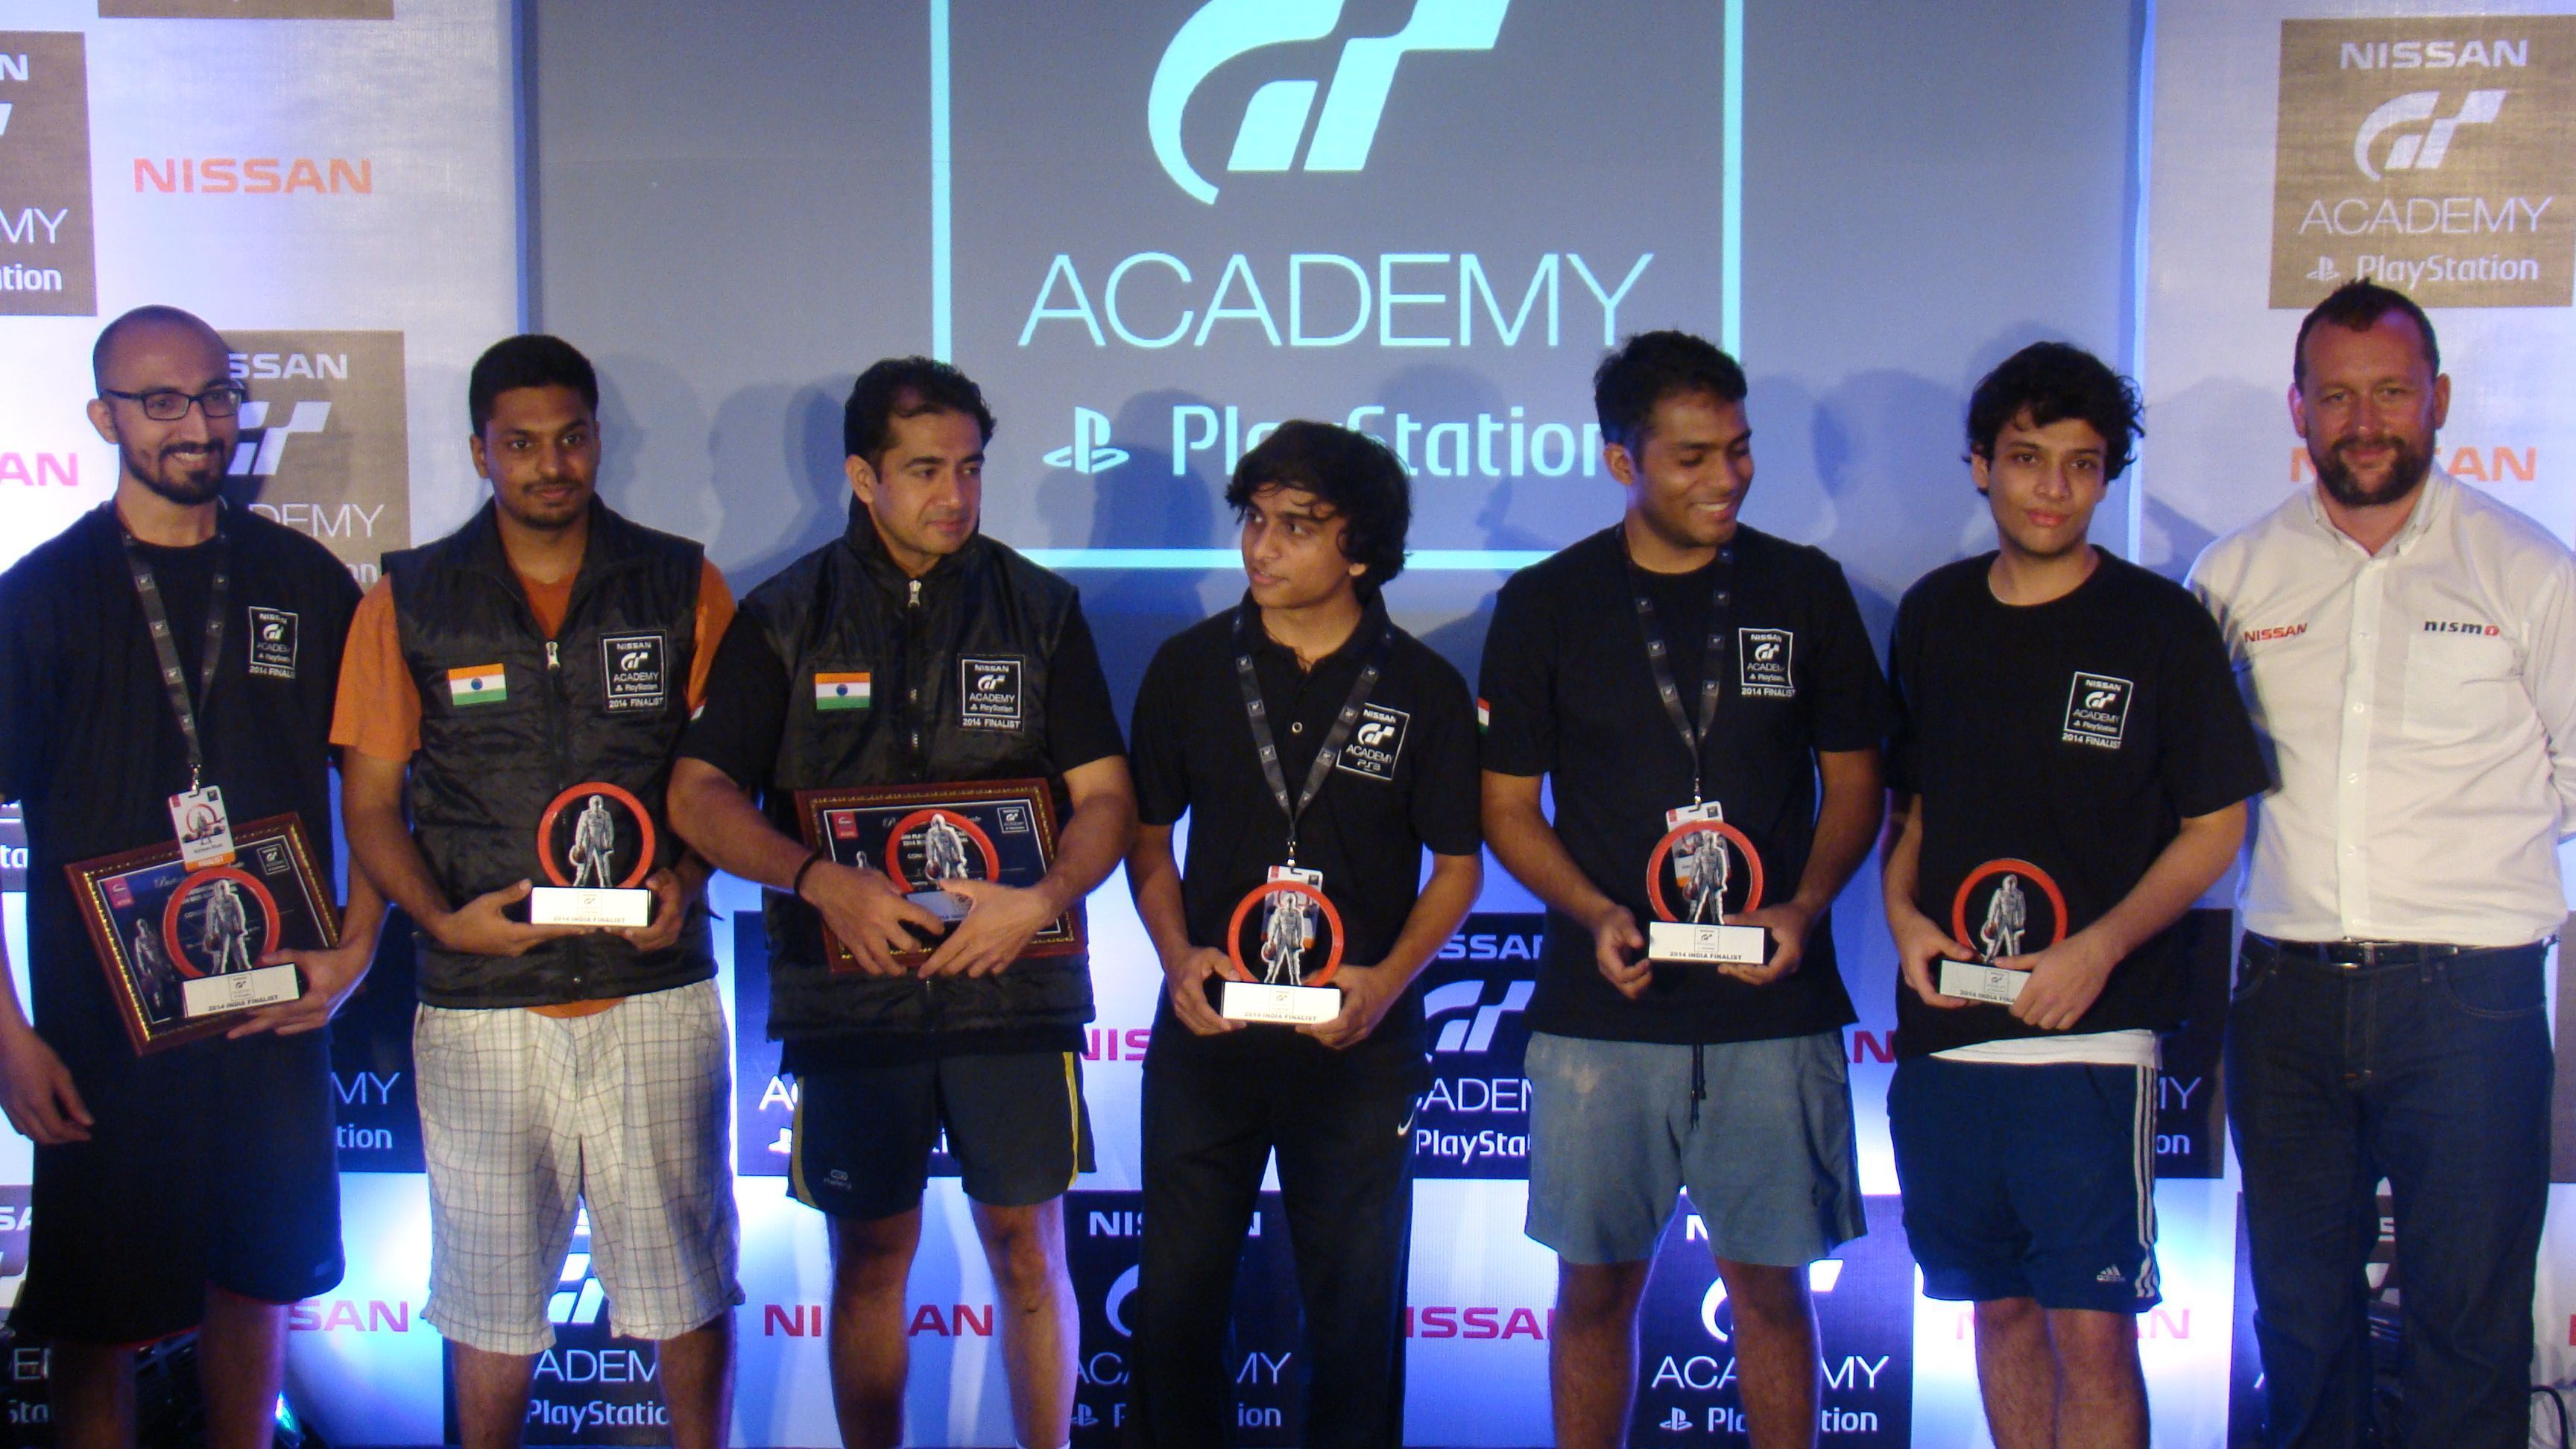 Nissan GT PlayStation Academy India: Six finalists shortlisted for Silverstone Circuit UK